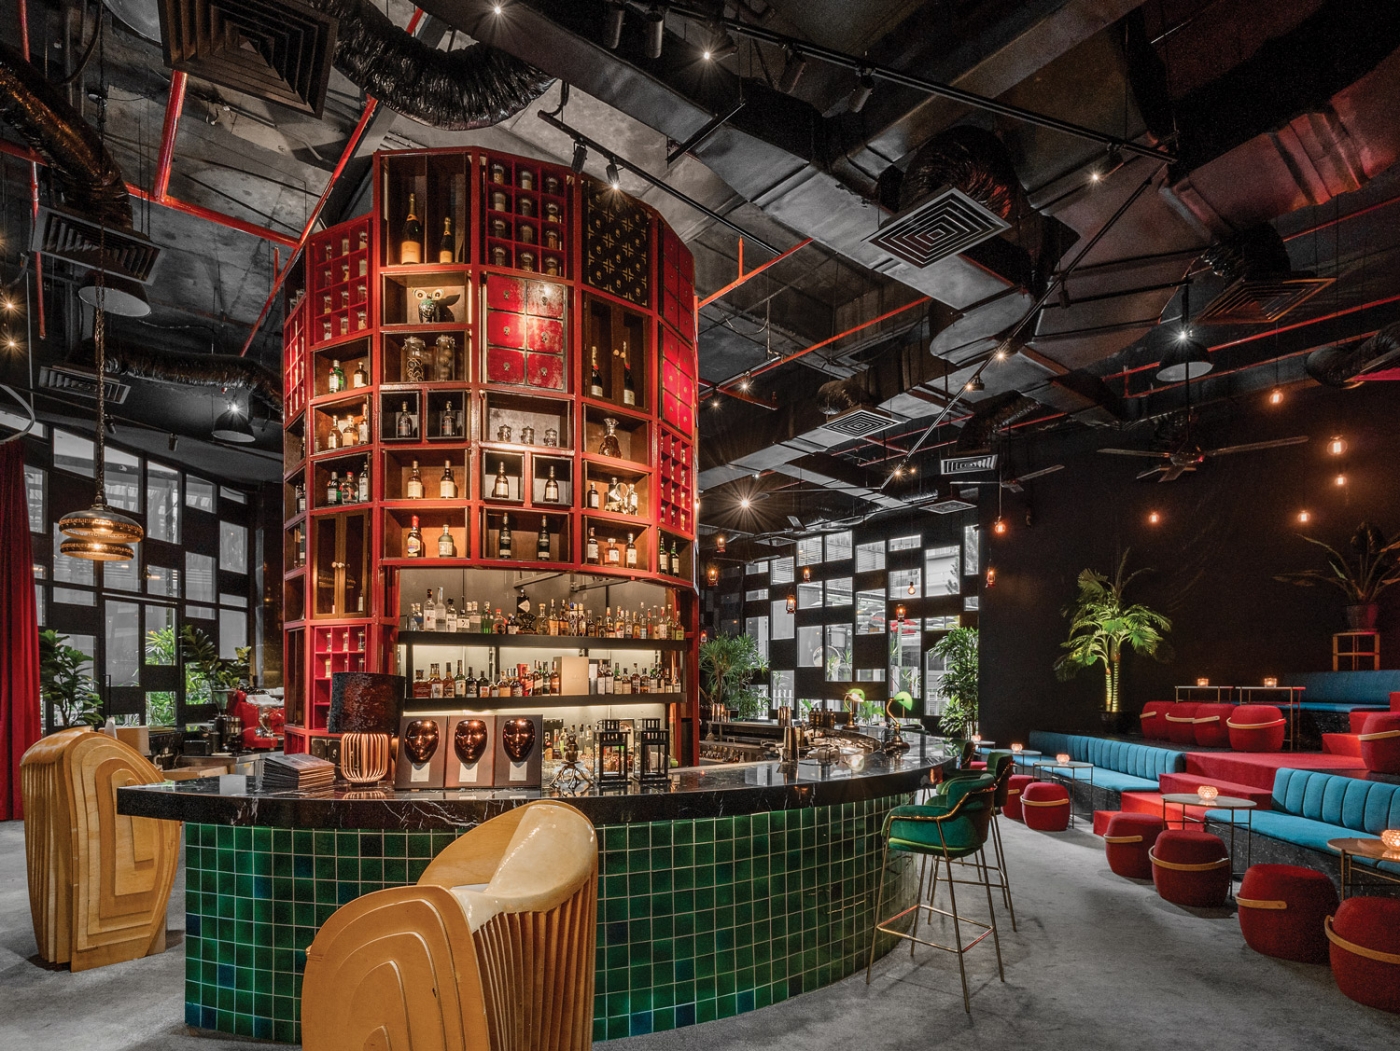 At the center of these three ‘regions’ are the circular bar and a layered staged drinking space perfect for events and people-watching corners.